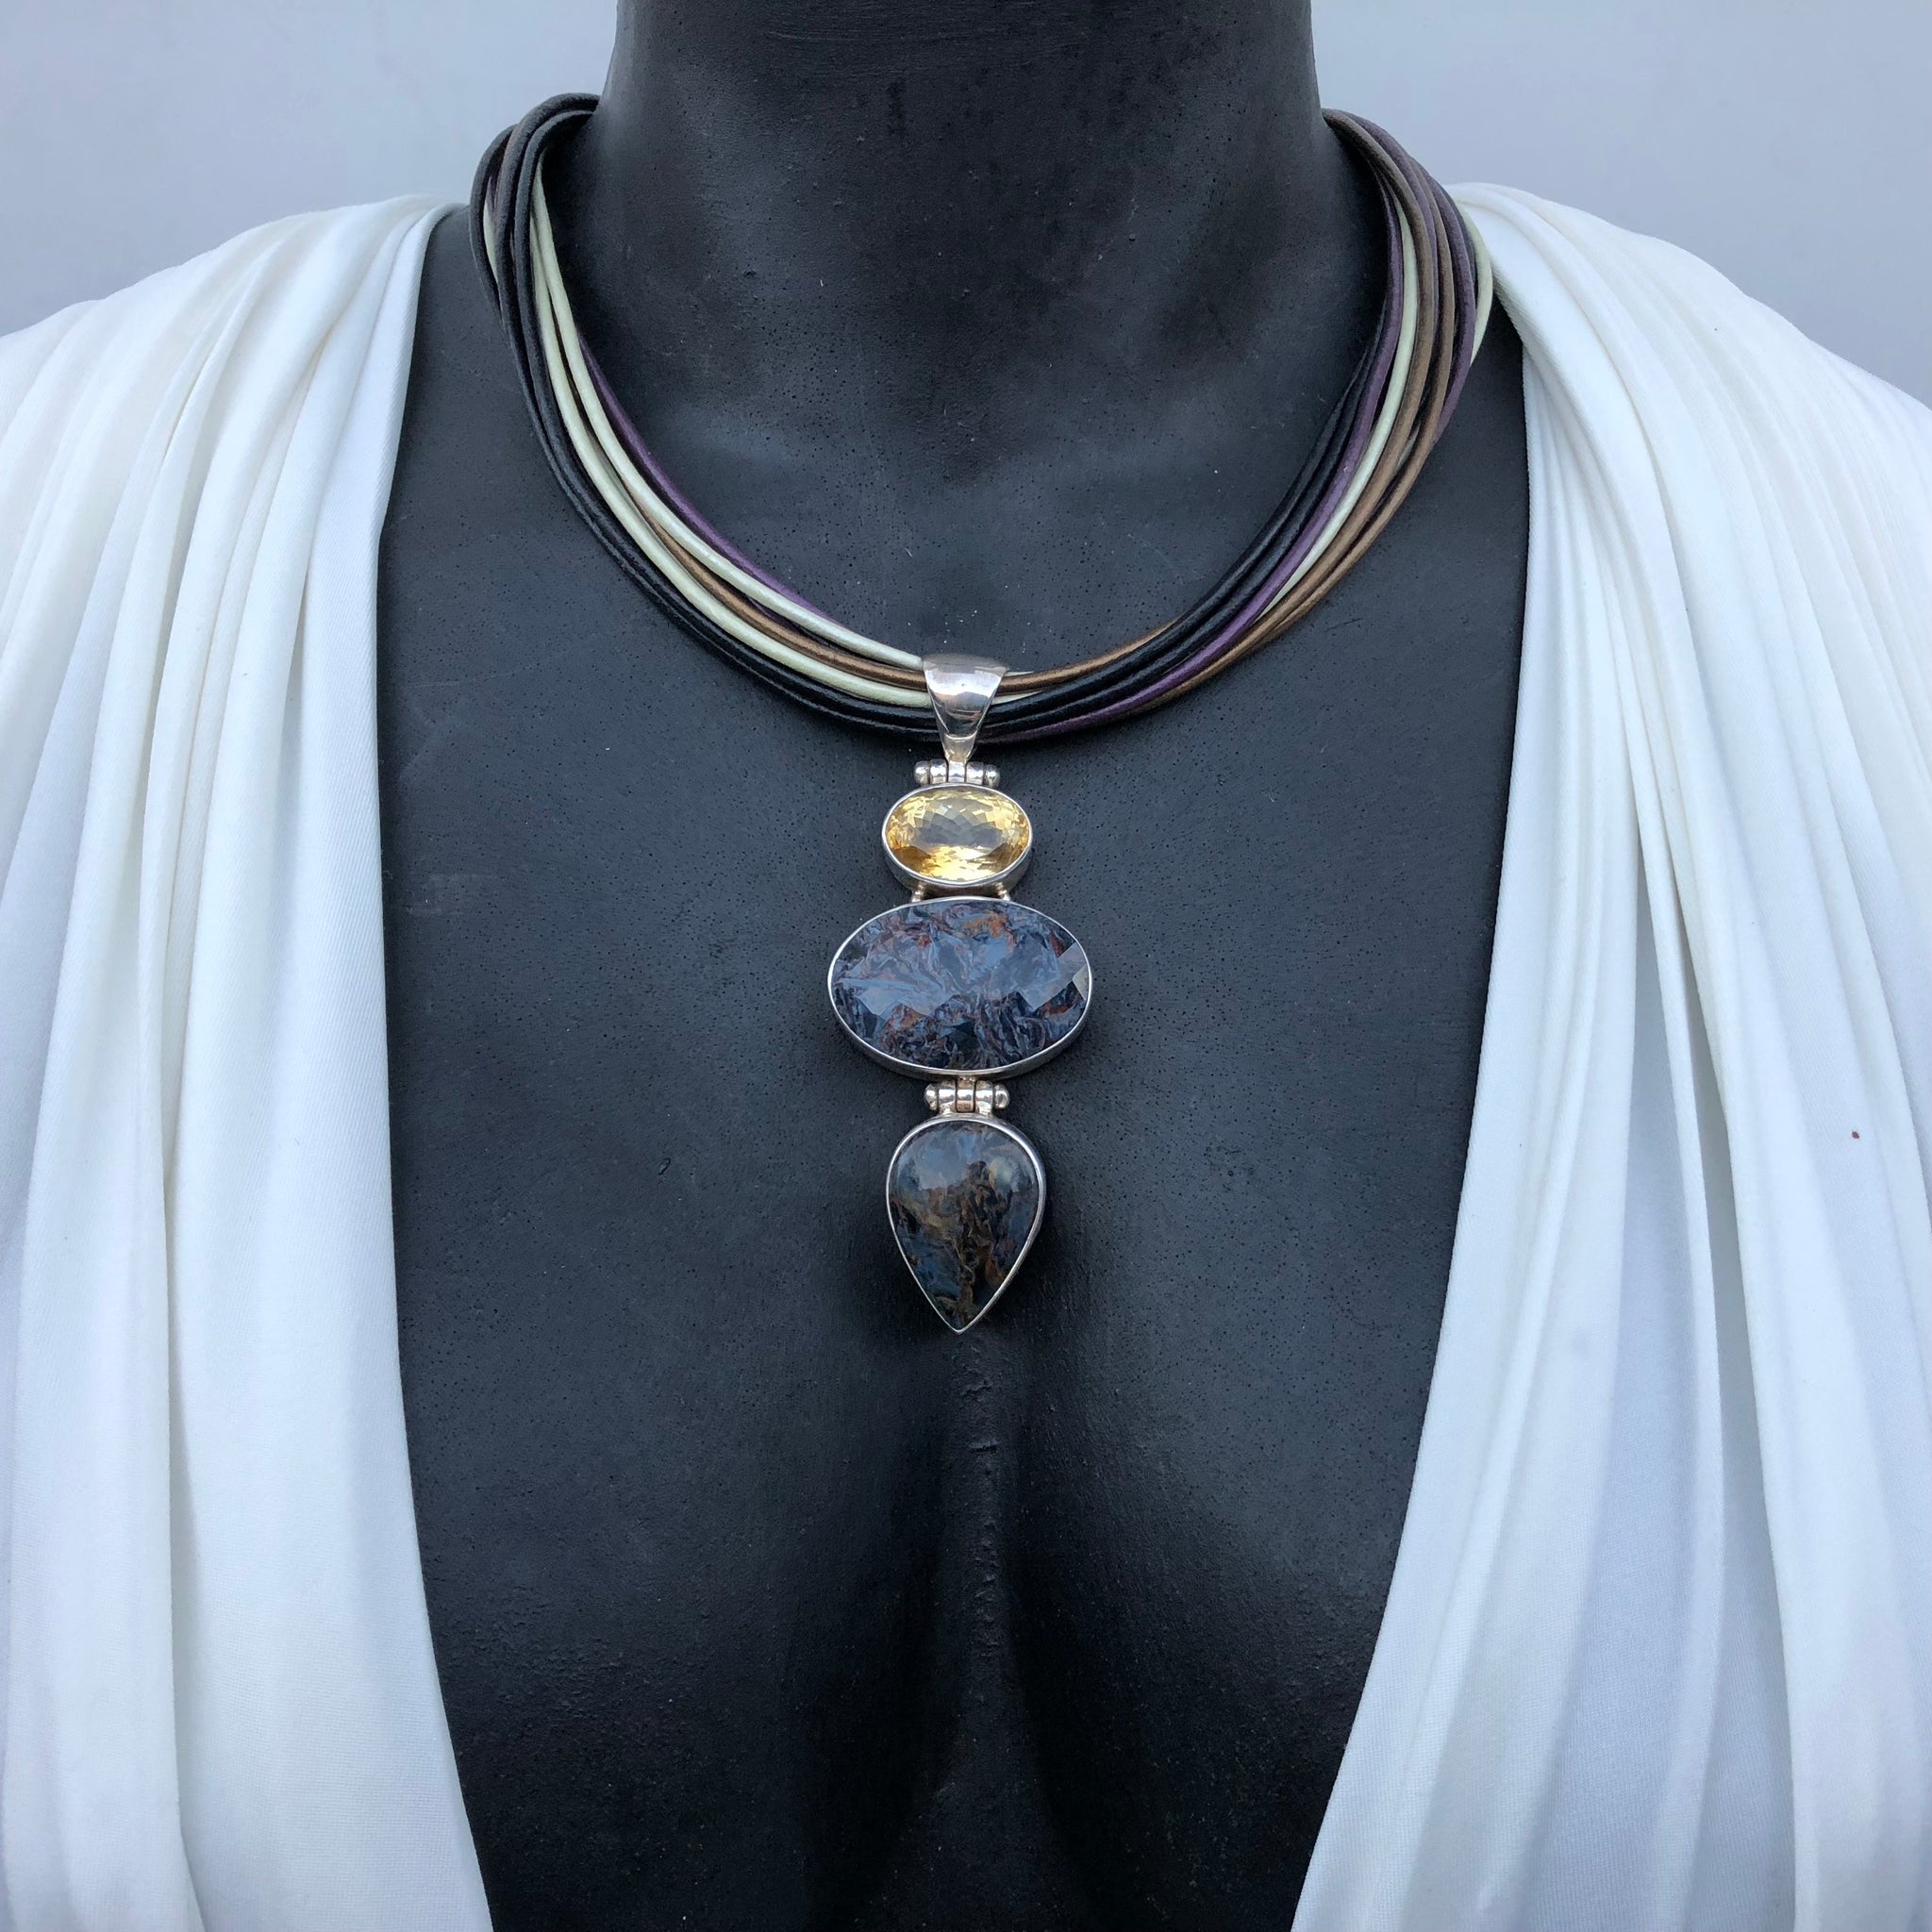 Leather and gems necklace choker 2.0 by NYET Jewelry